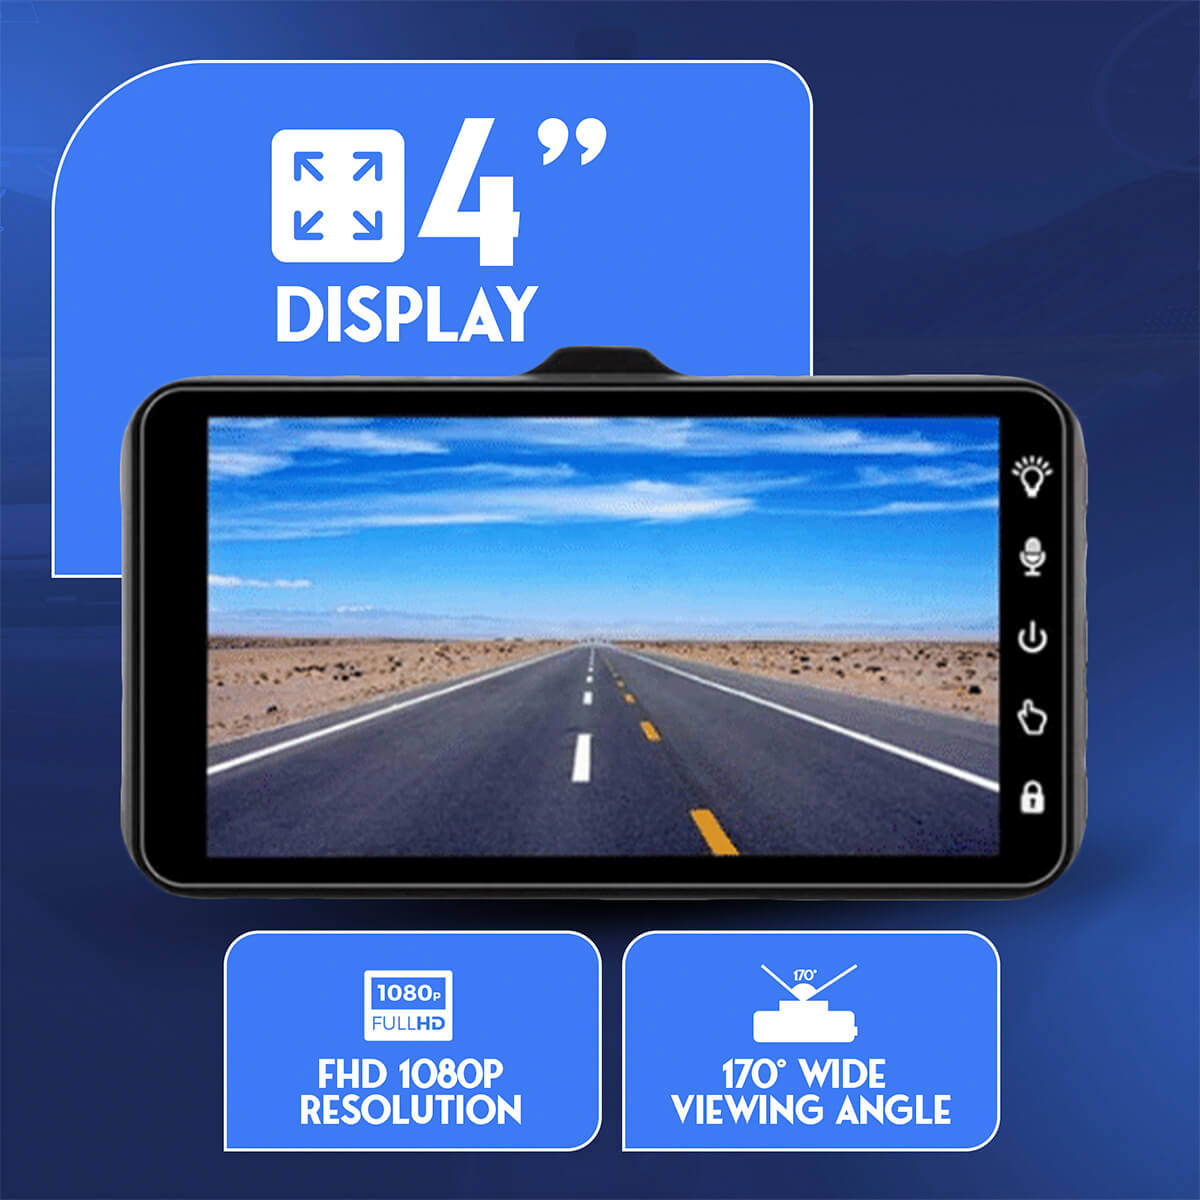 Capture every journey with precision using the Dash Cam featuring a 4-inch display, 1080p resolution, and 170-degree wide viewing angle